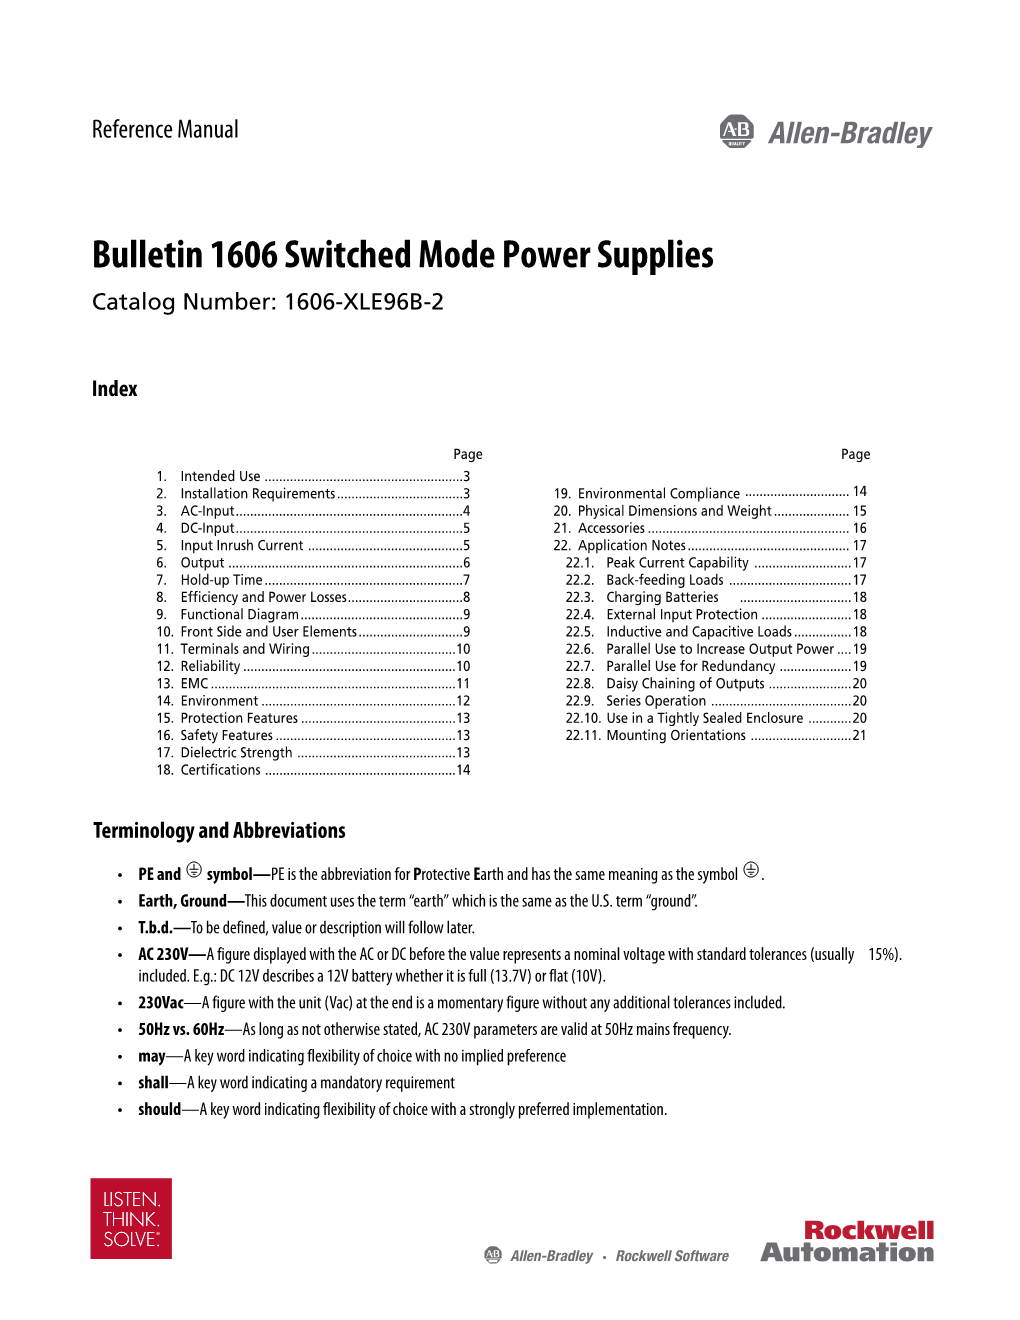 Bulletin 1606 Switched Mode Power Supplies Catalog Number: 1606-XLE96B-2